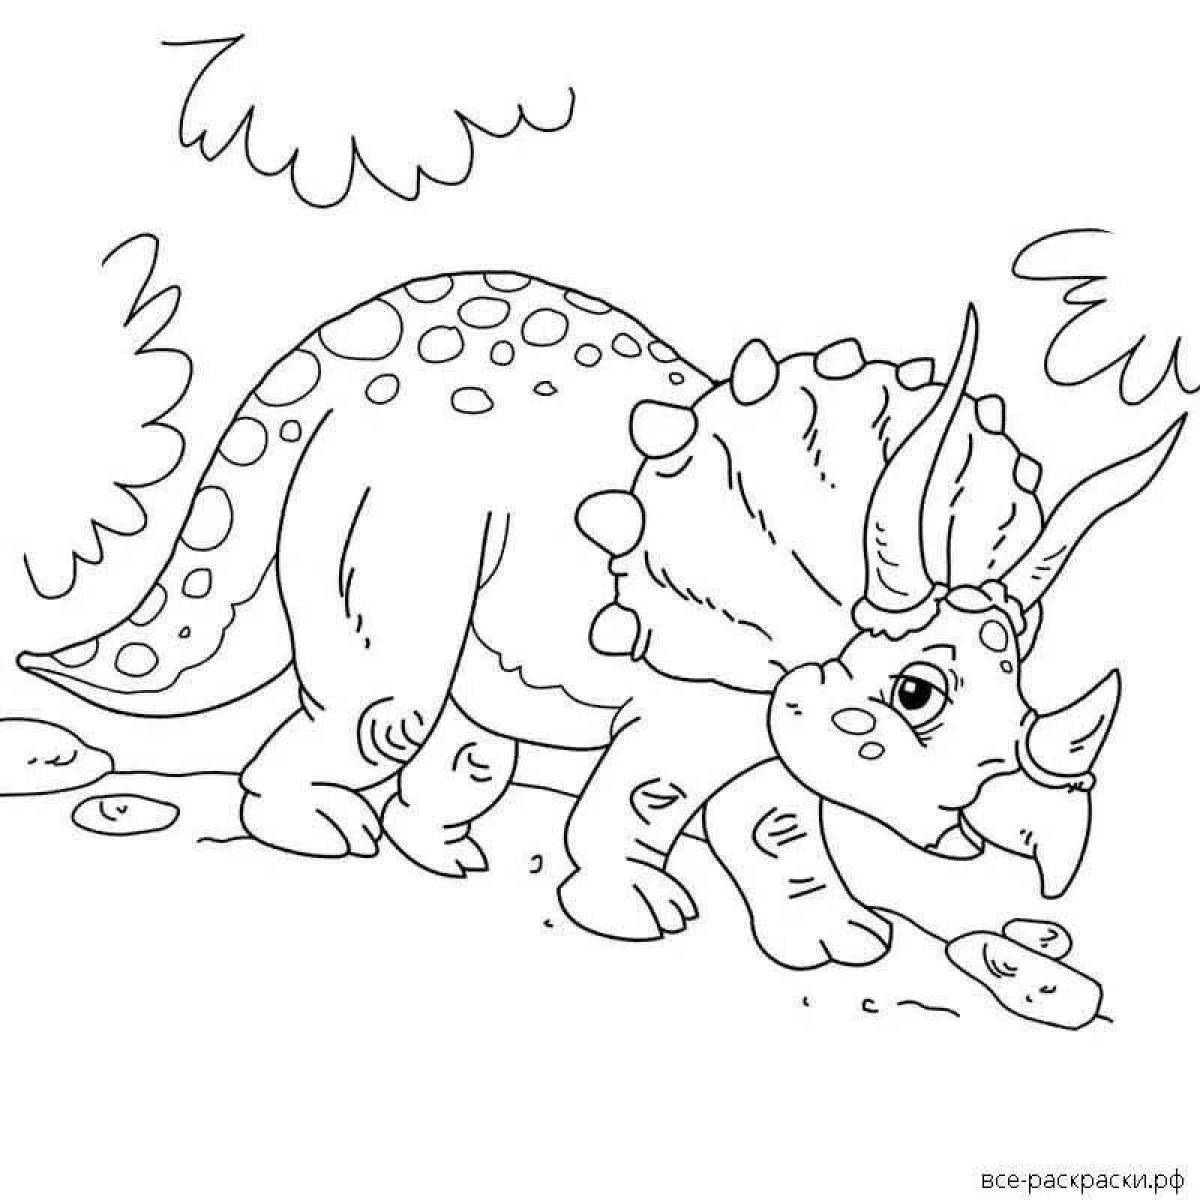 Attractive triceratops coloring book